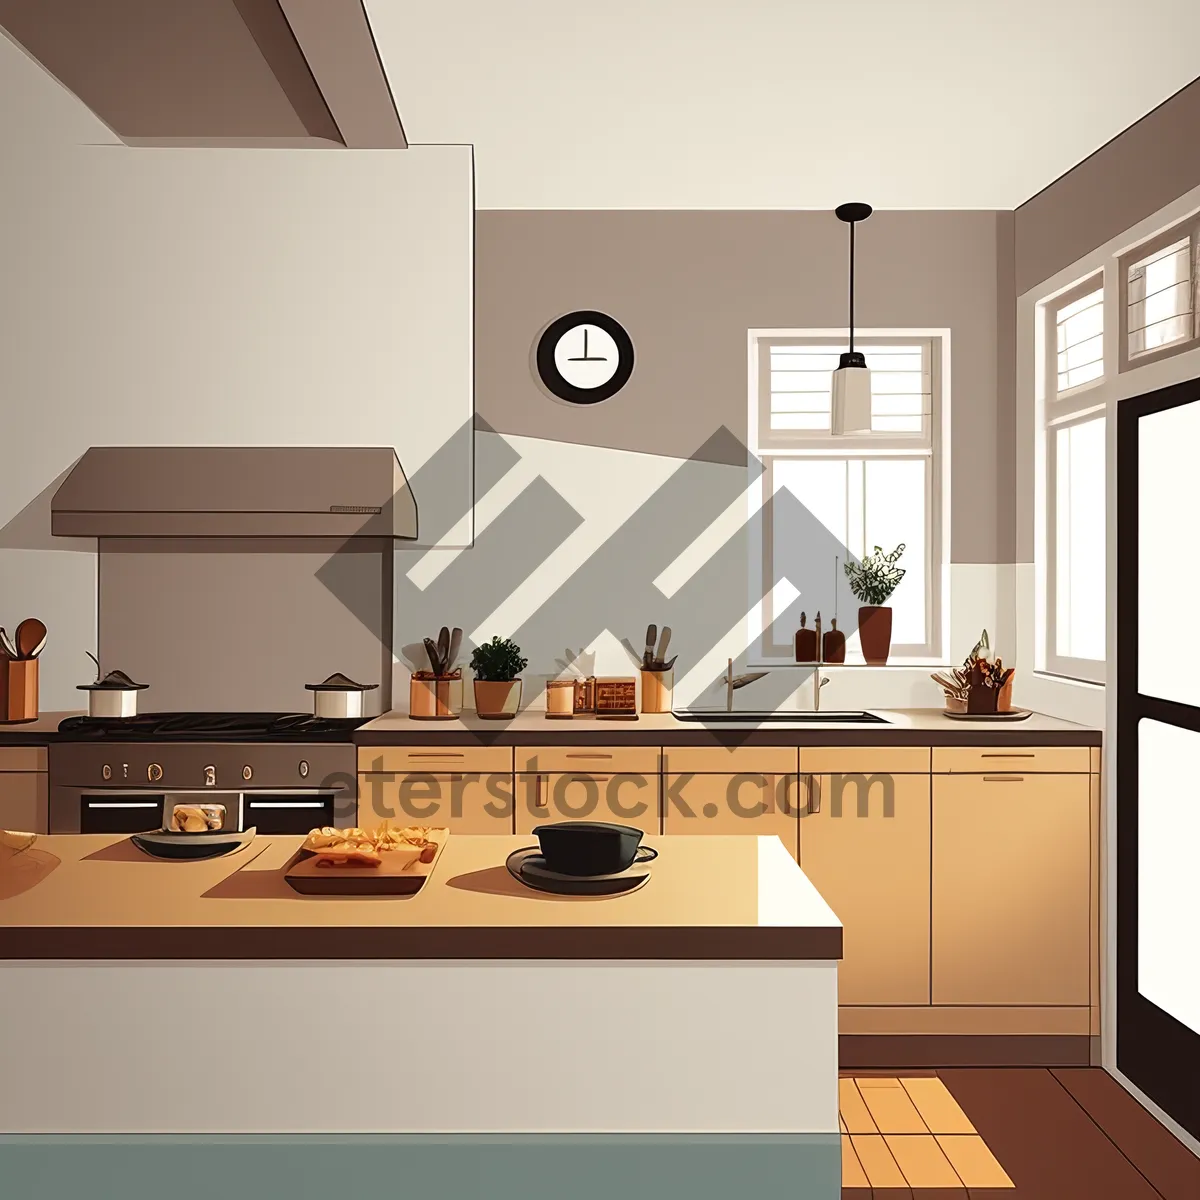 Picture of Modern kitchen interior with stylish furniture and wooden floor